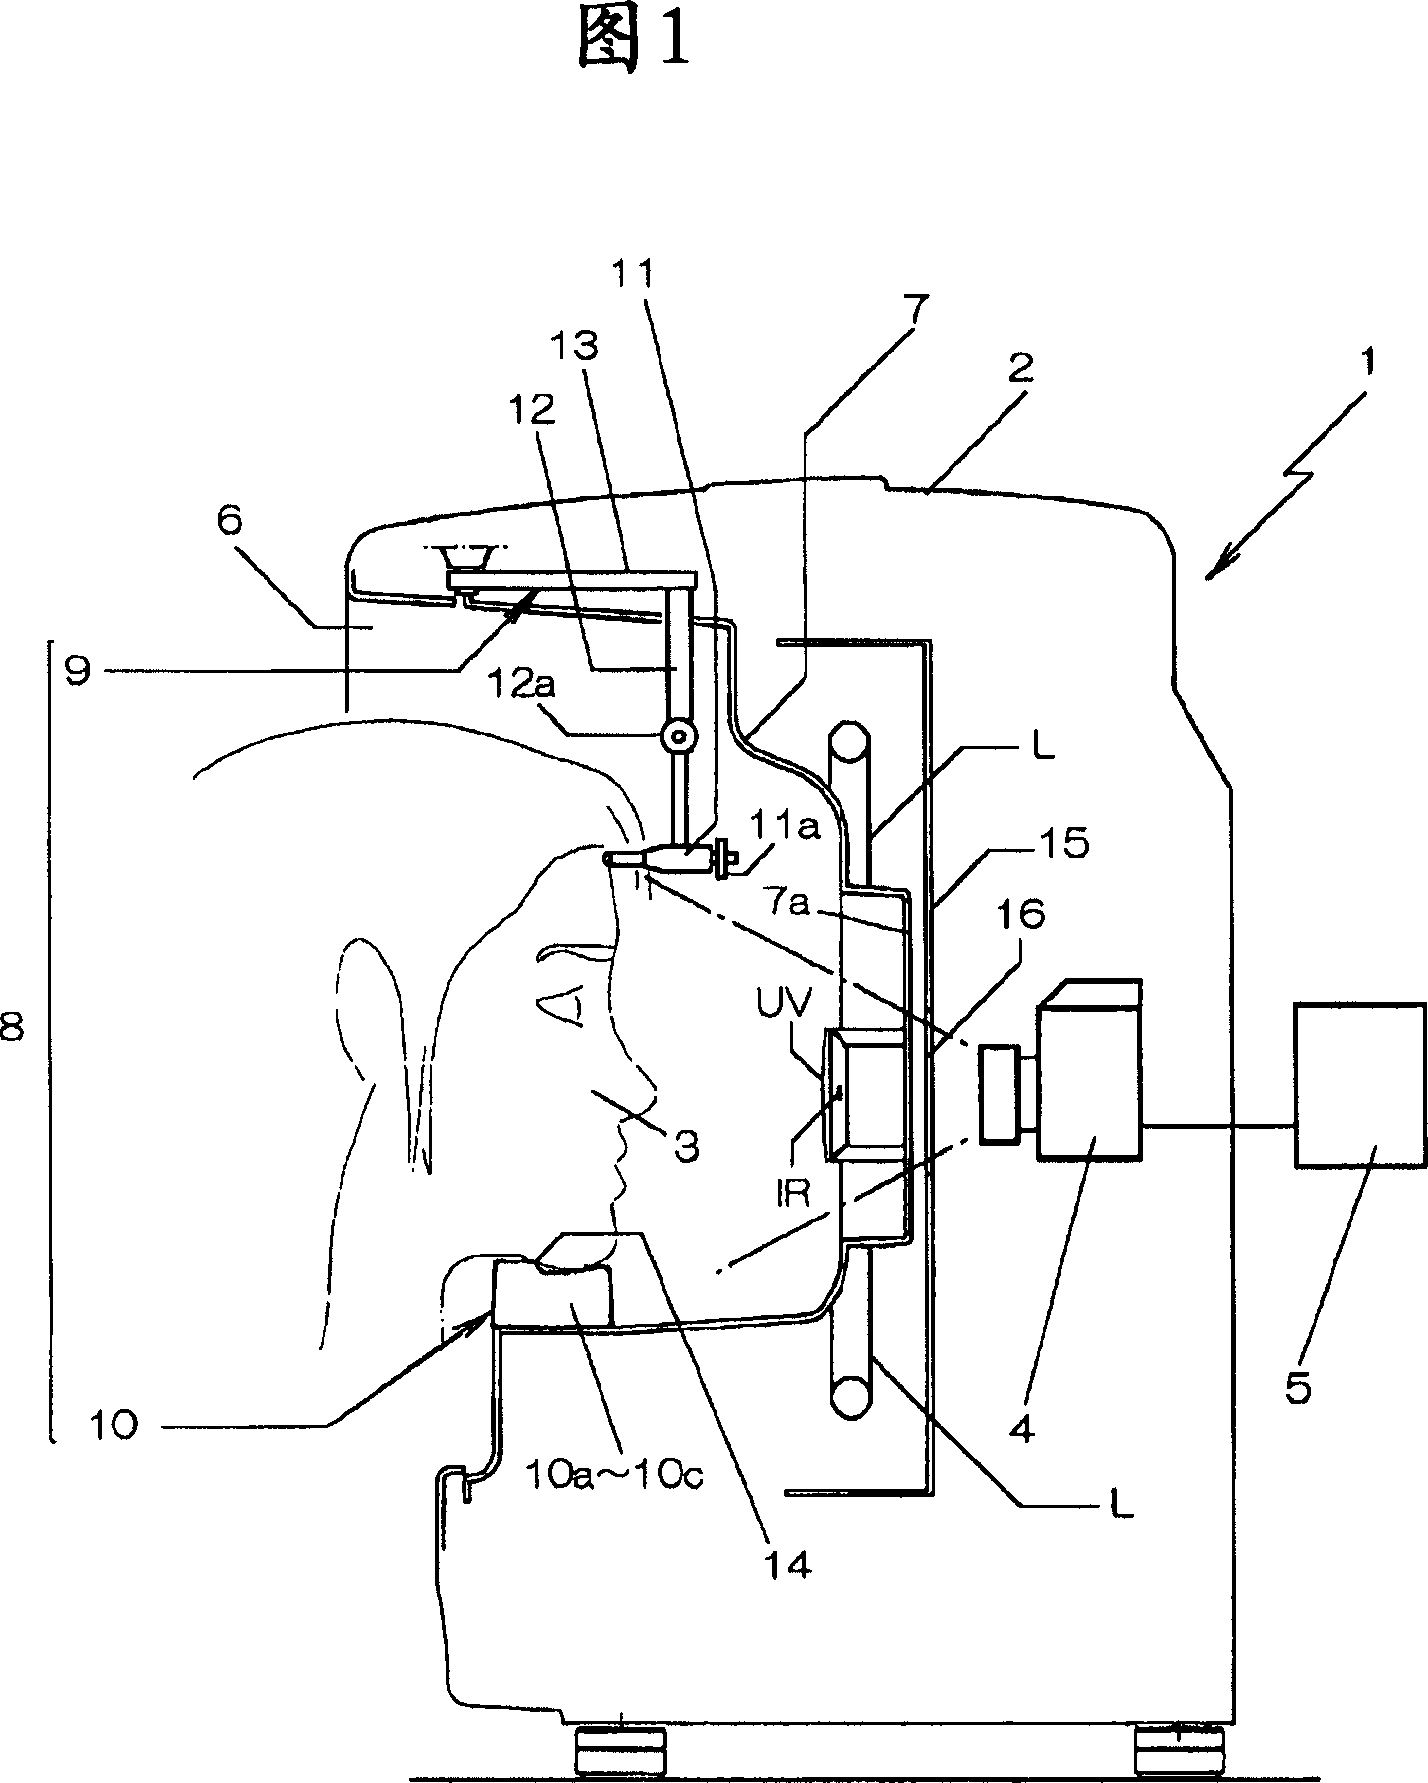 Face imaging device